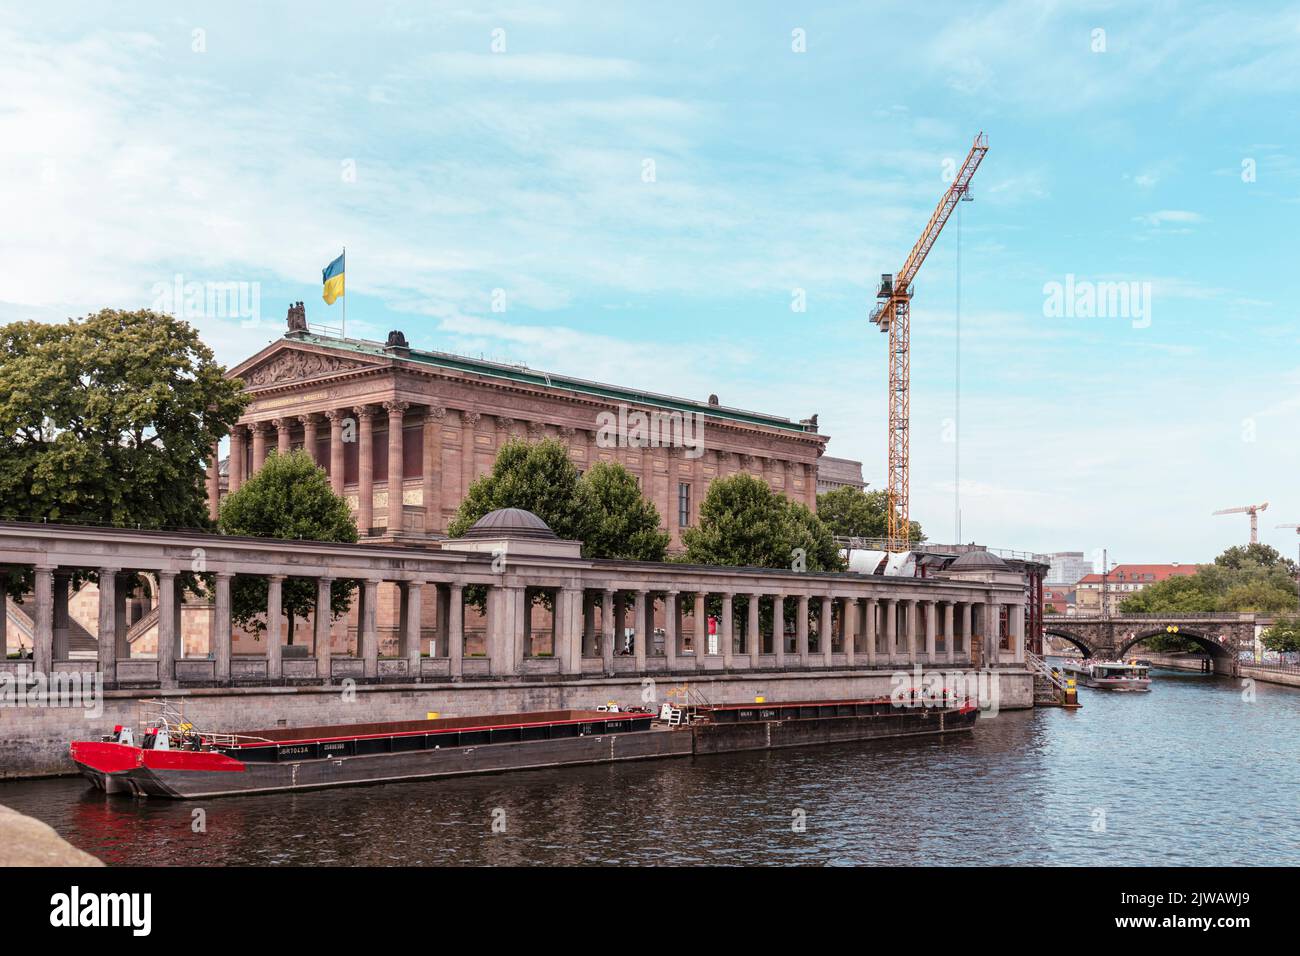 Berlin, Germany, 22 July 2022: An heavy Barge on the river Spree in Berlin.On the background the Arts Museum with an ukraine flag Stock Photo